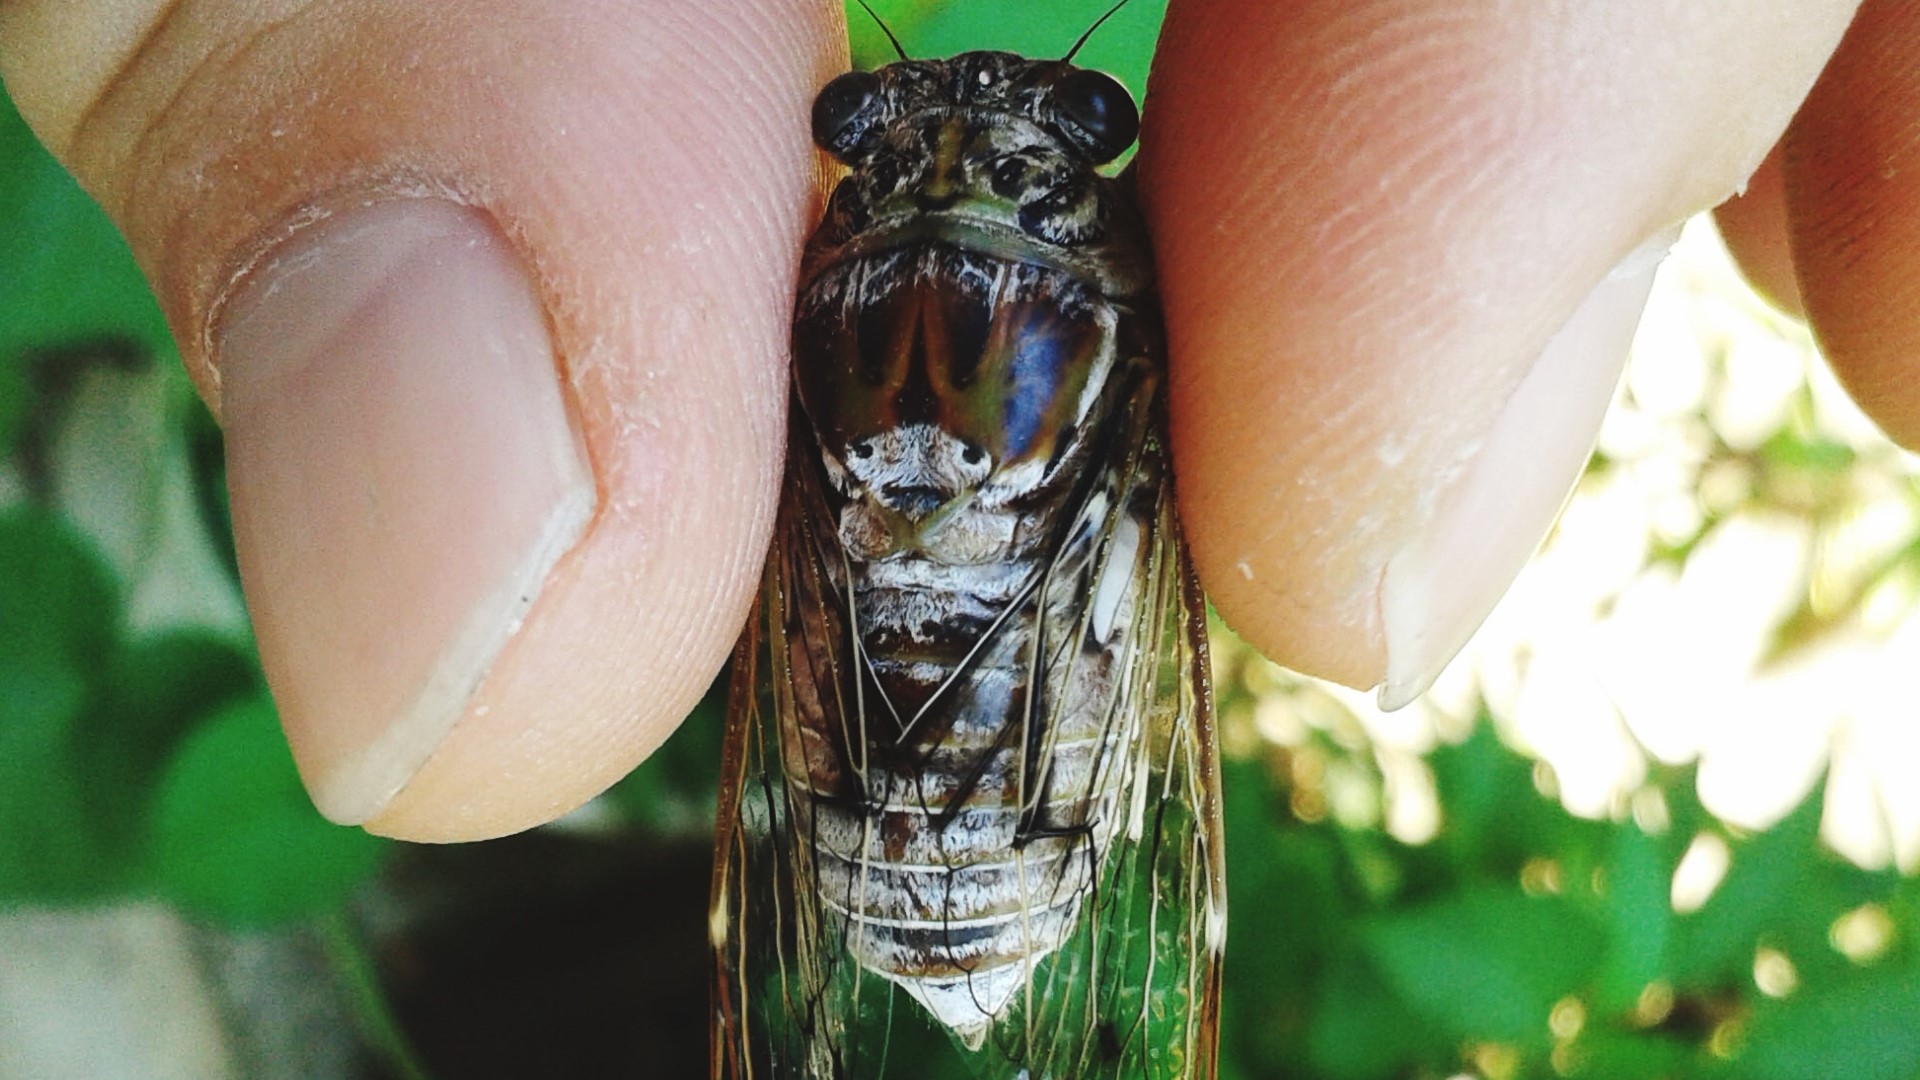 The Brood X cicada is emerging after 17 years spent burrowing through the soil